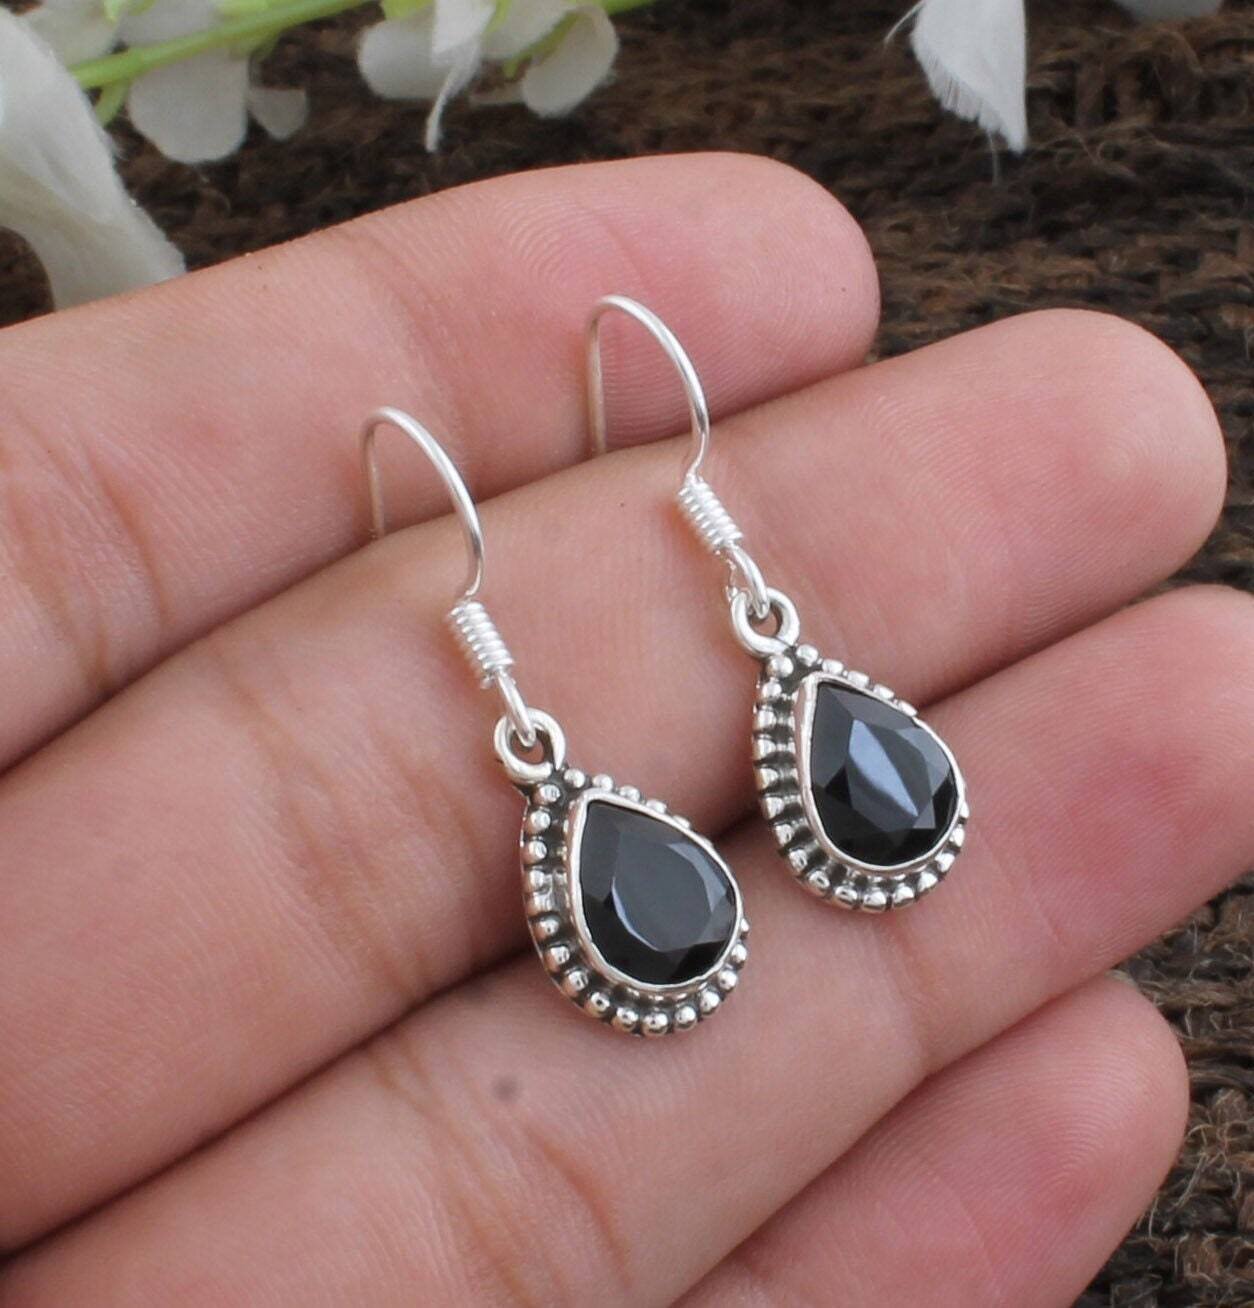 Black Onyx Earring-Pear Design Silver Earring-Cut Stone Earring-Daughter Gift Earring-Beautiful Jewelry Gift Item For Her Mother And Sister